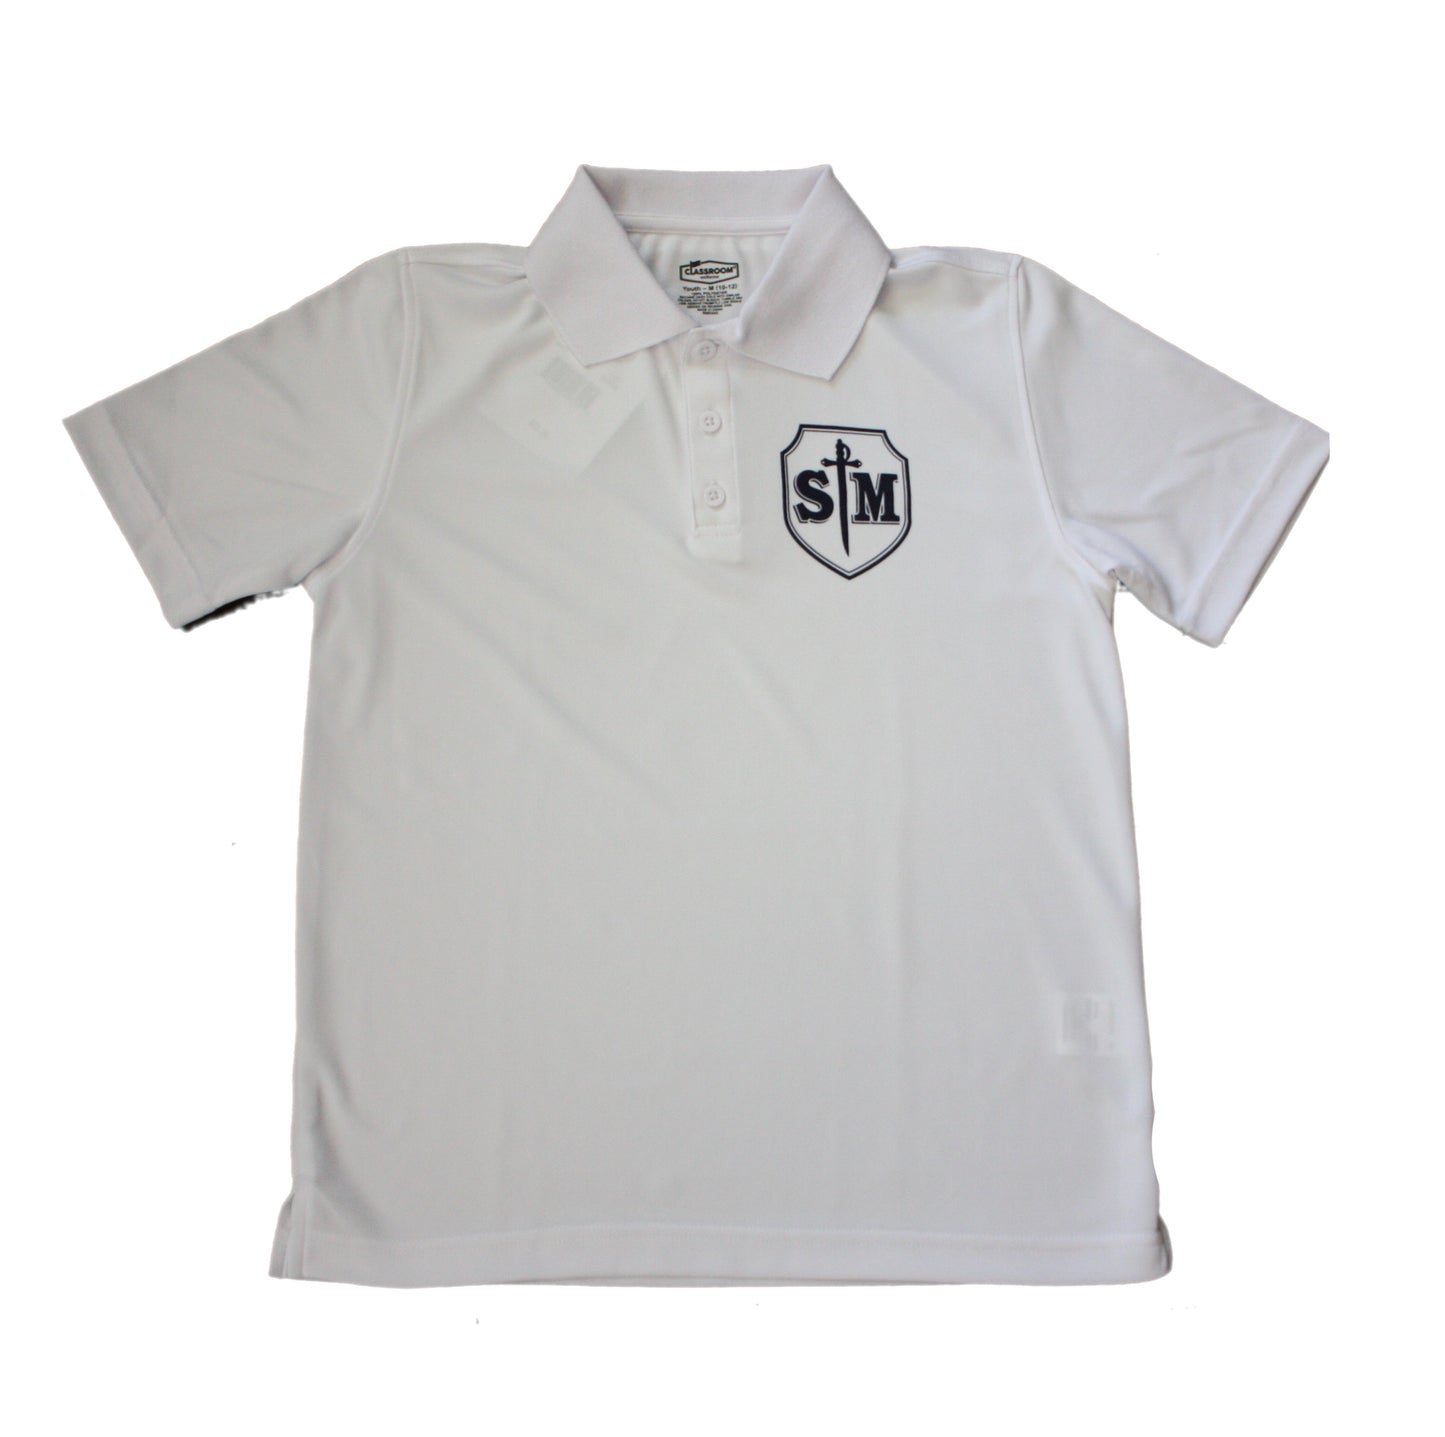 St. Michael Girl’s White Short Sleeve Dry Fit Polo